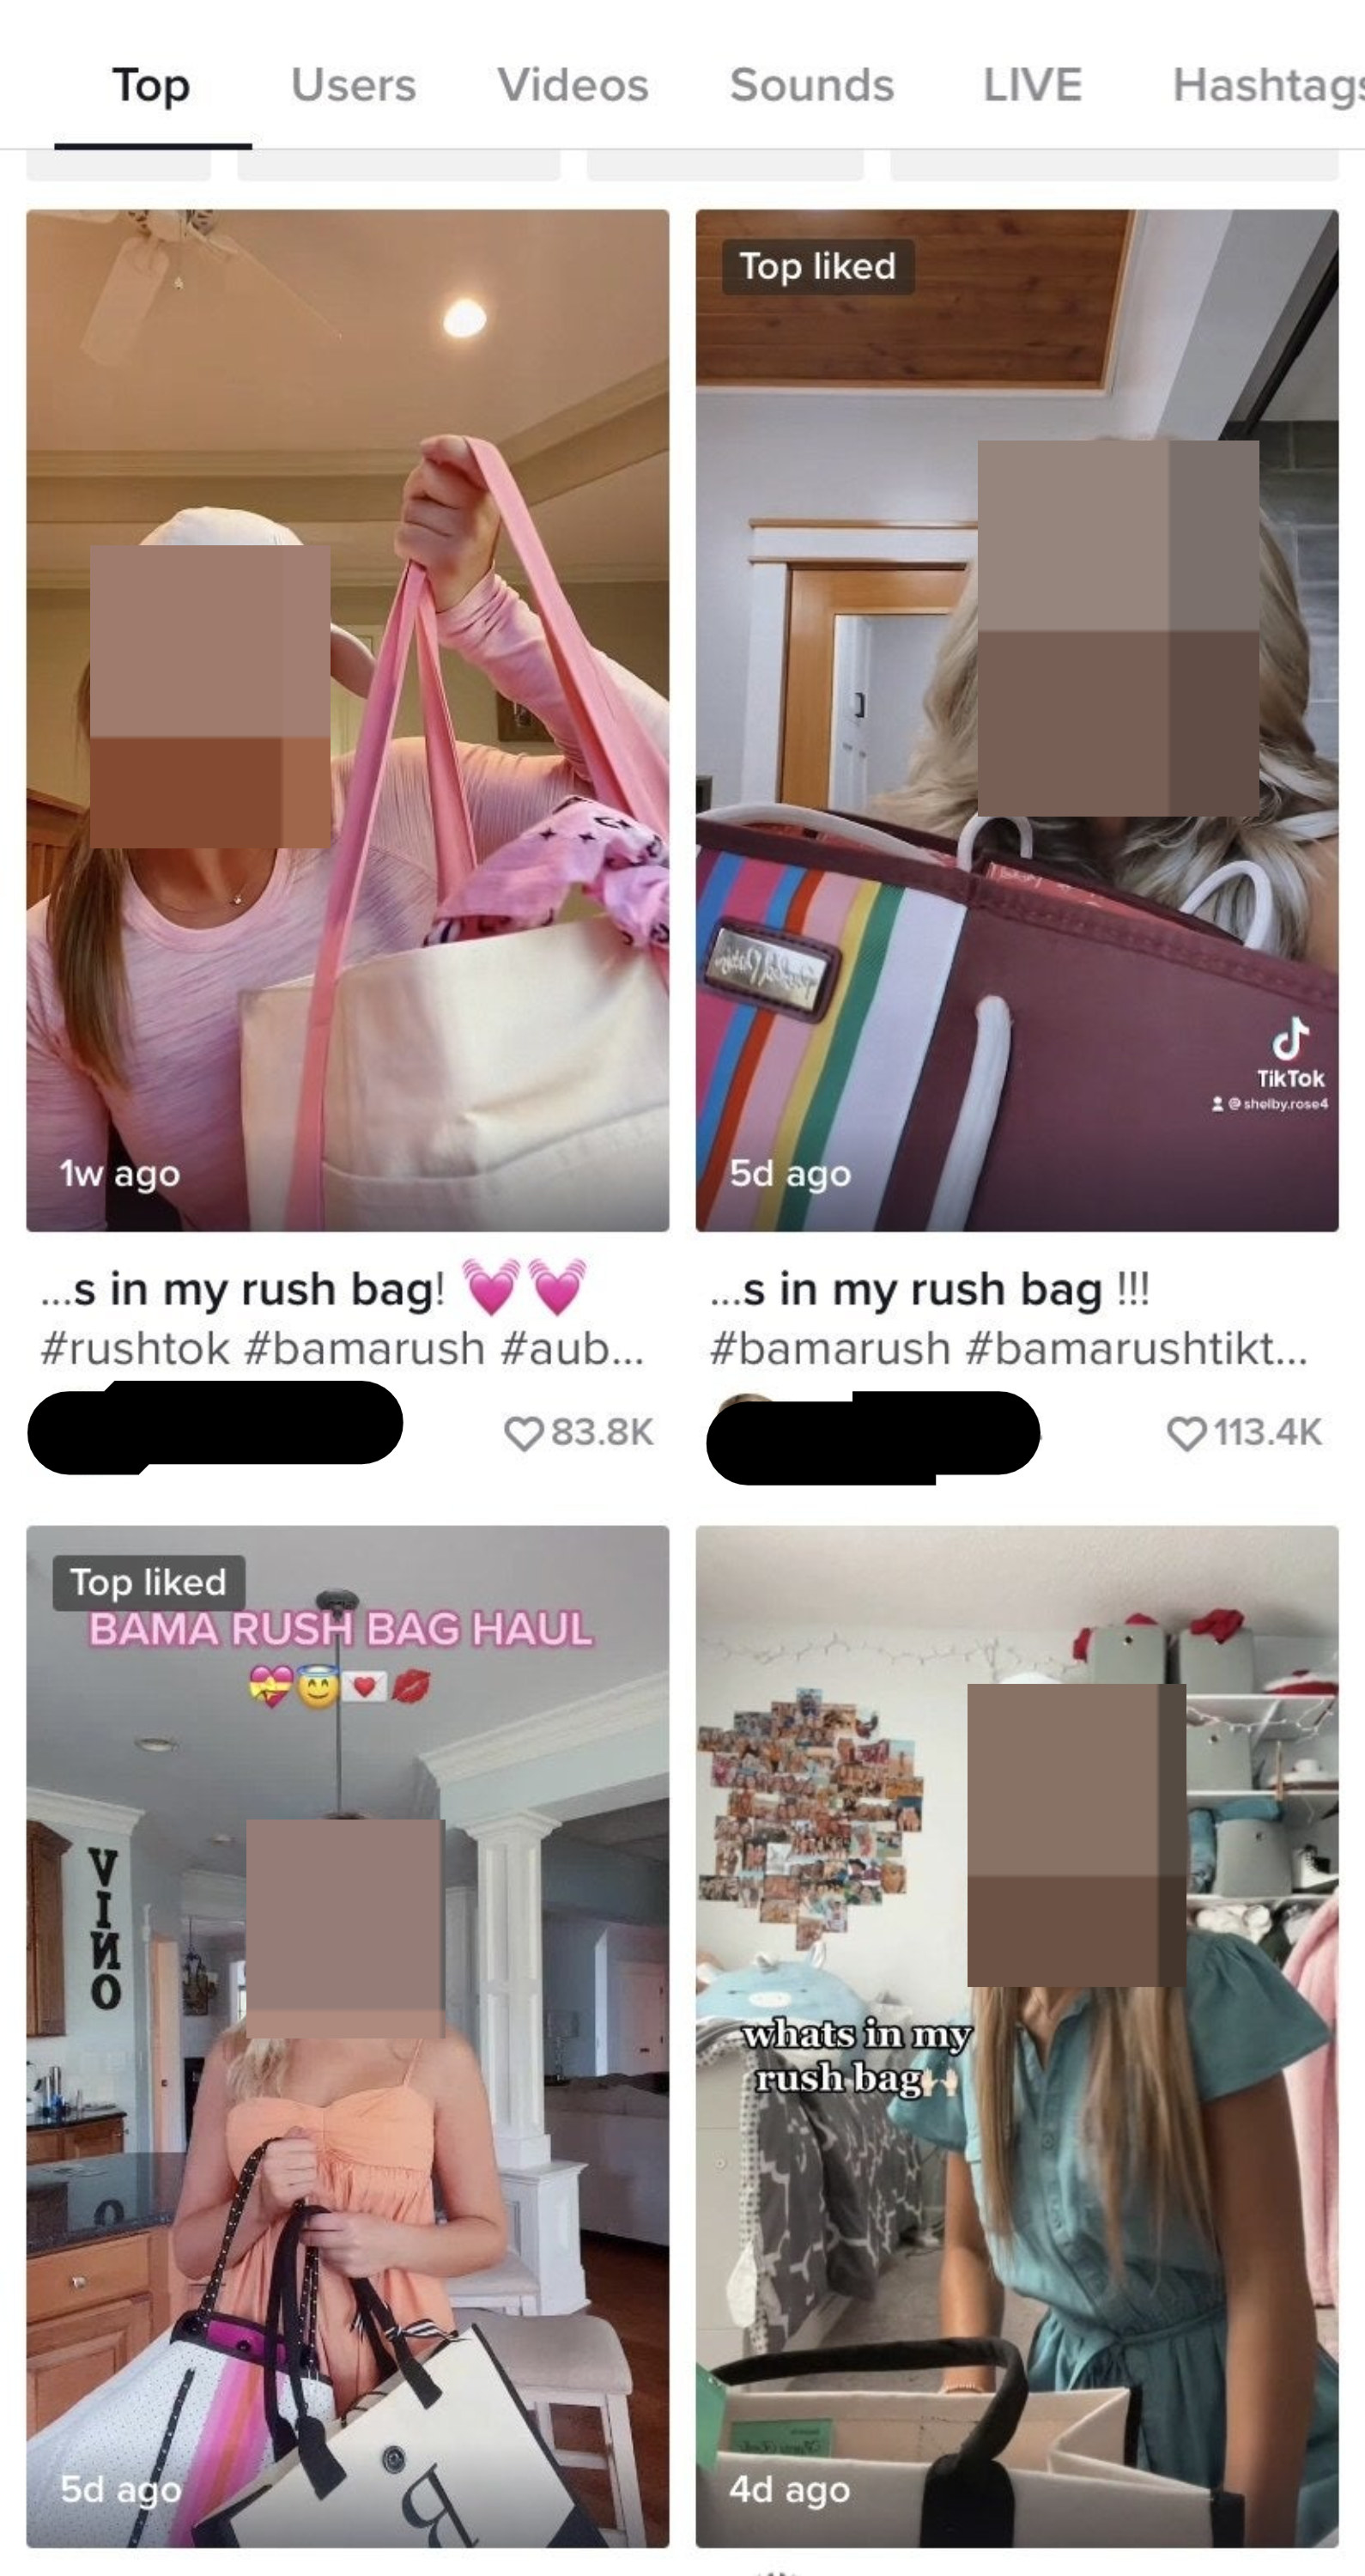 Tiles of young women showing what&#x27;s in their rush bag